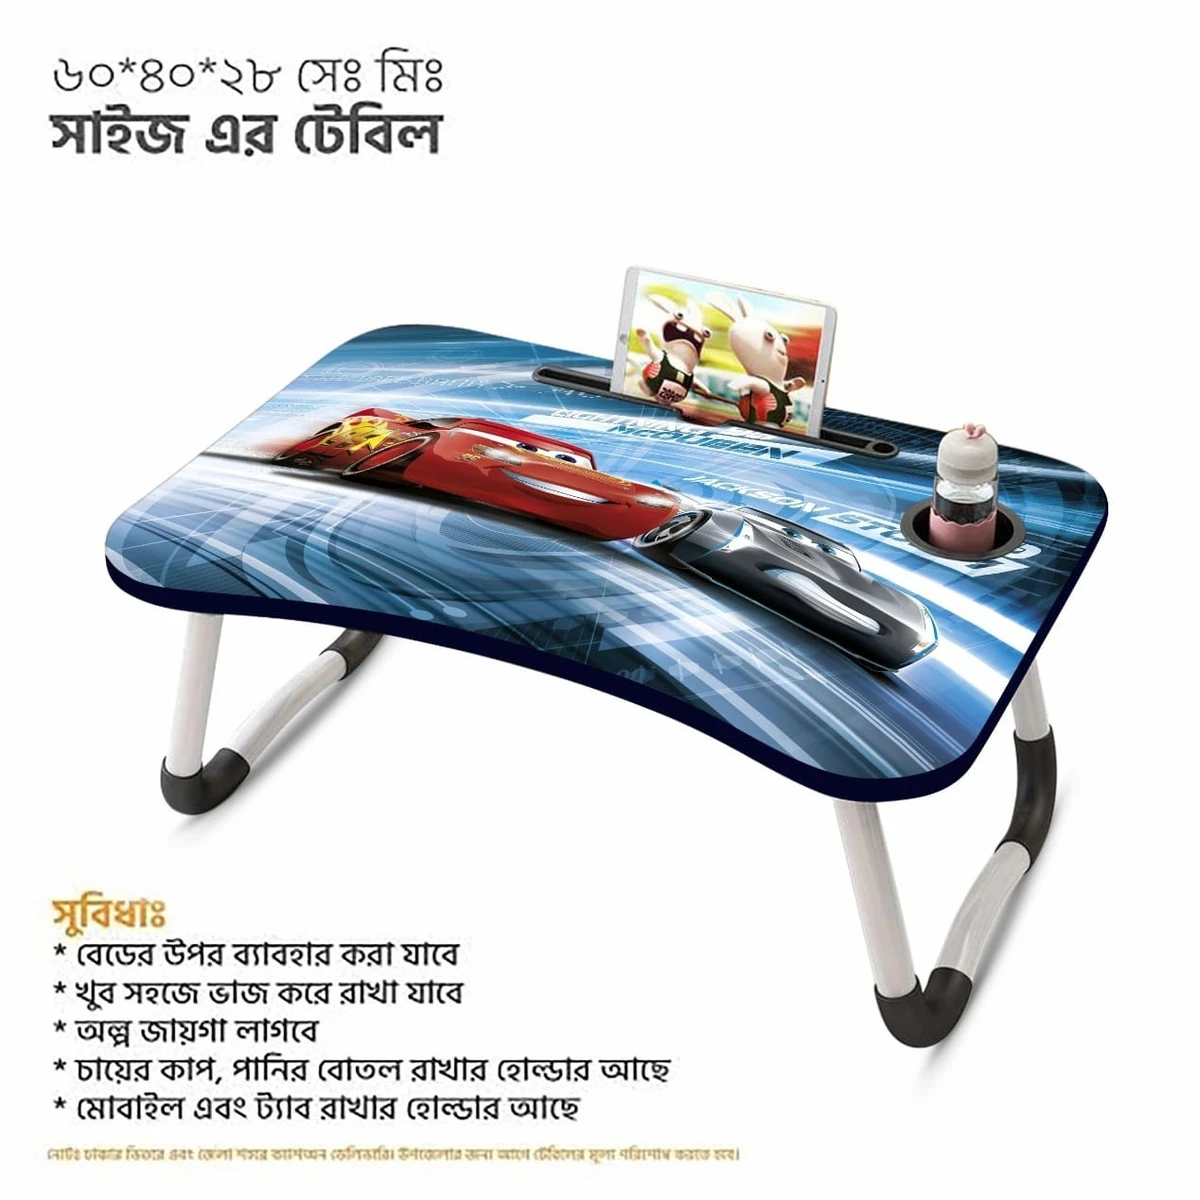 Foldable Laptop Table & Kids Reading Table Code 46